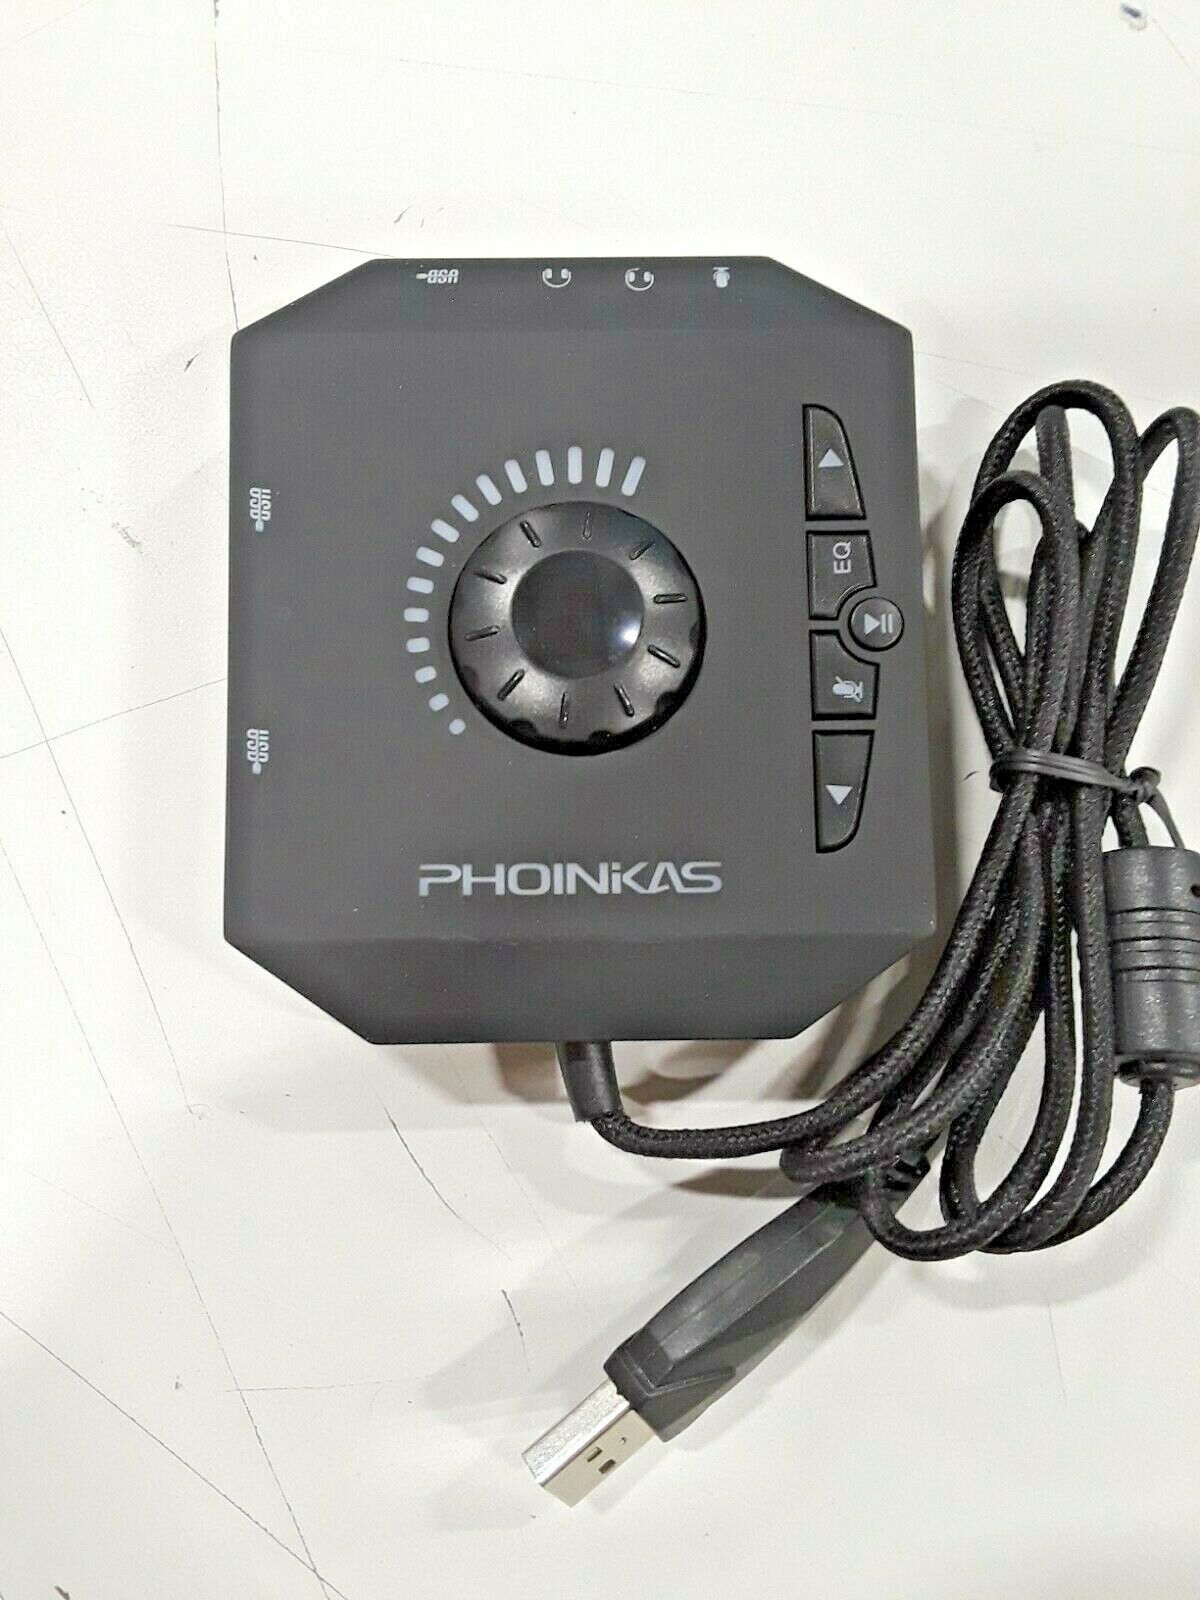 Phoinikas T-10 USB Sound Card Hub For Computer/ Laptop +Variety Of Sound Effects